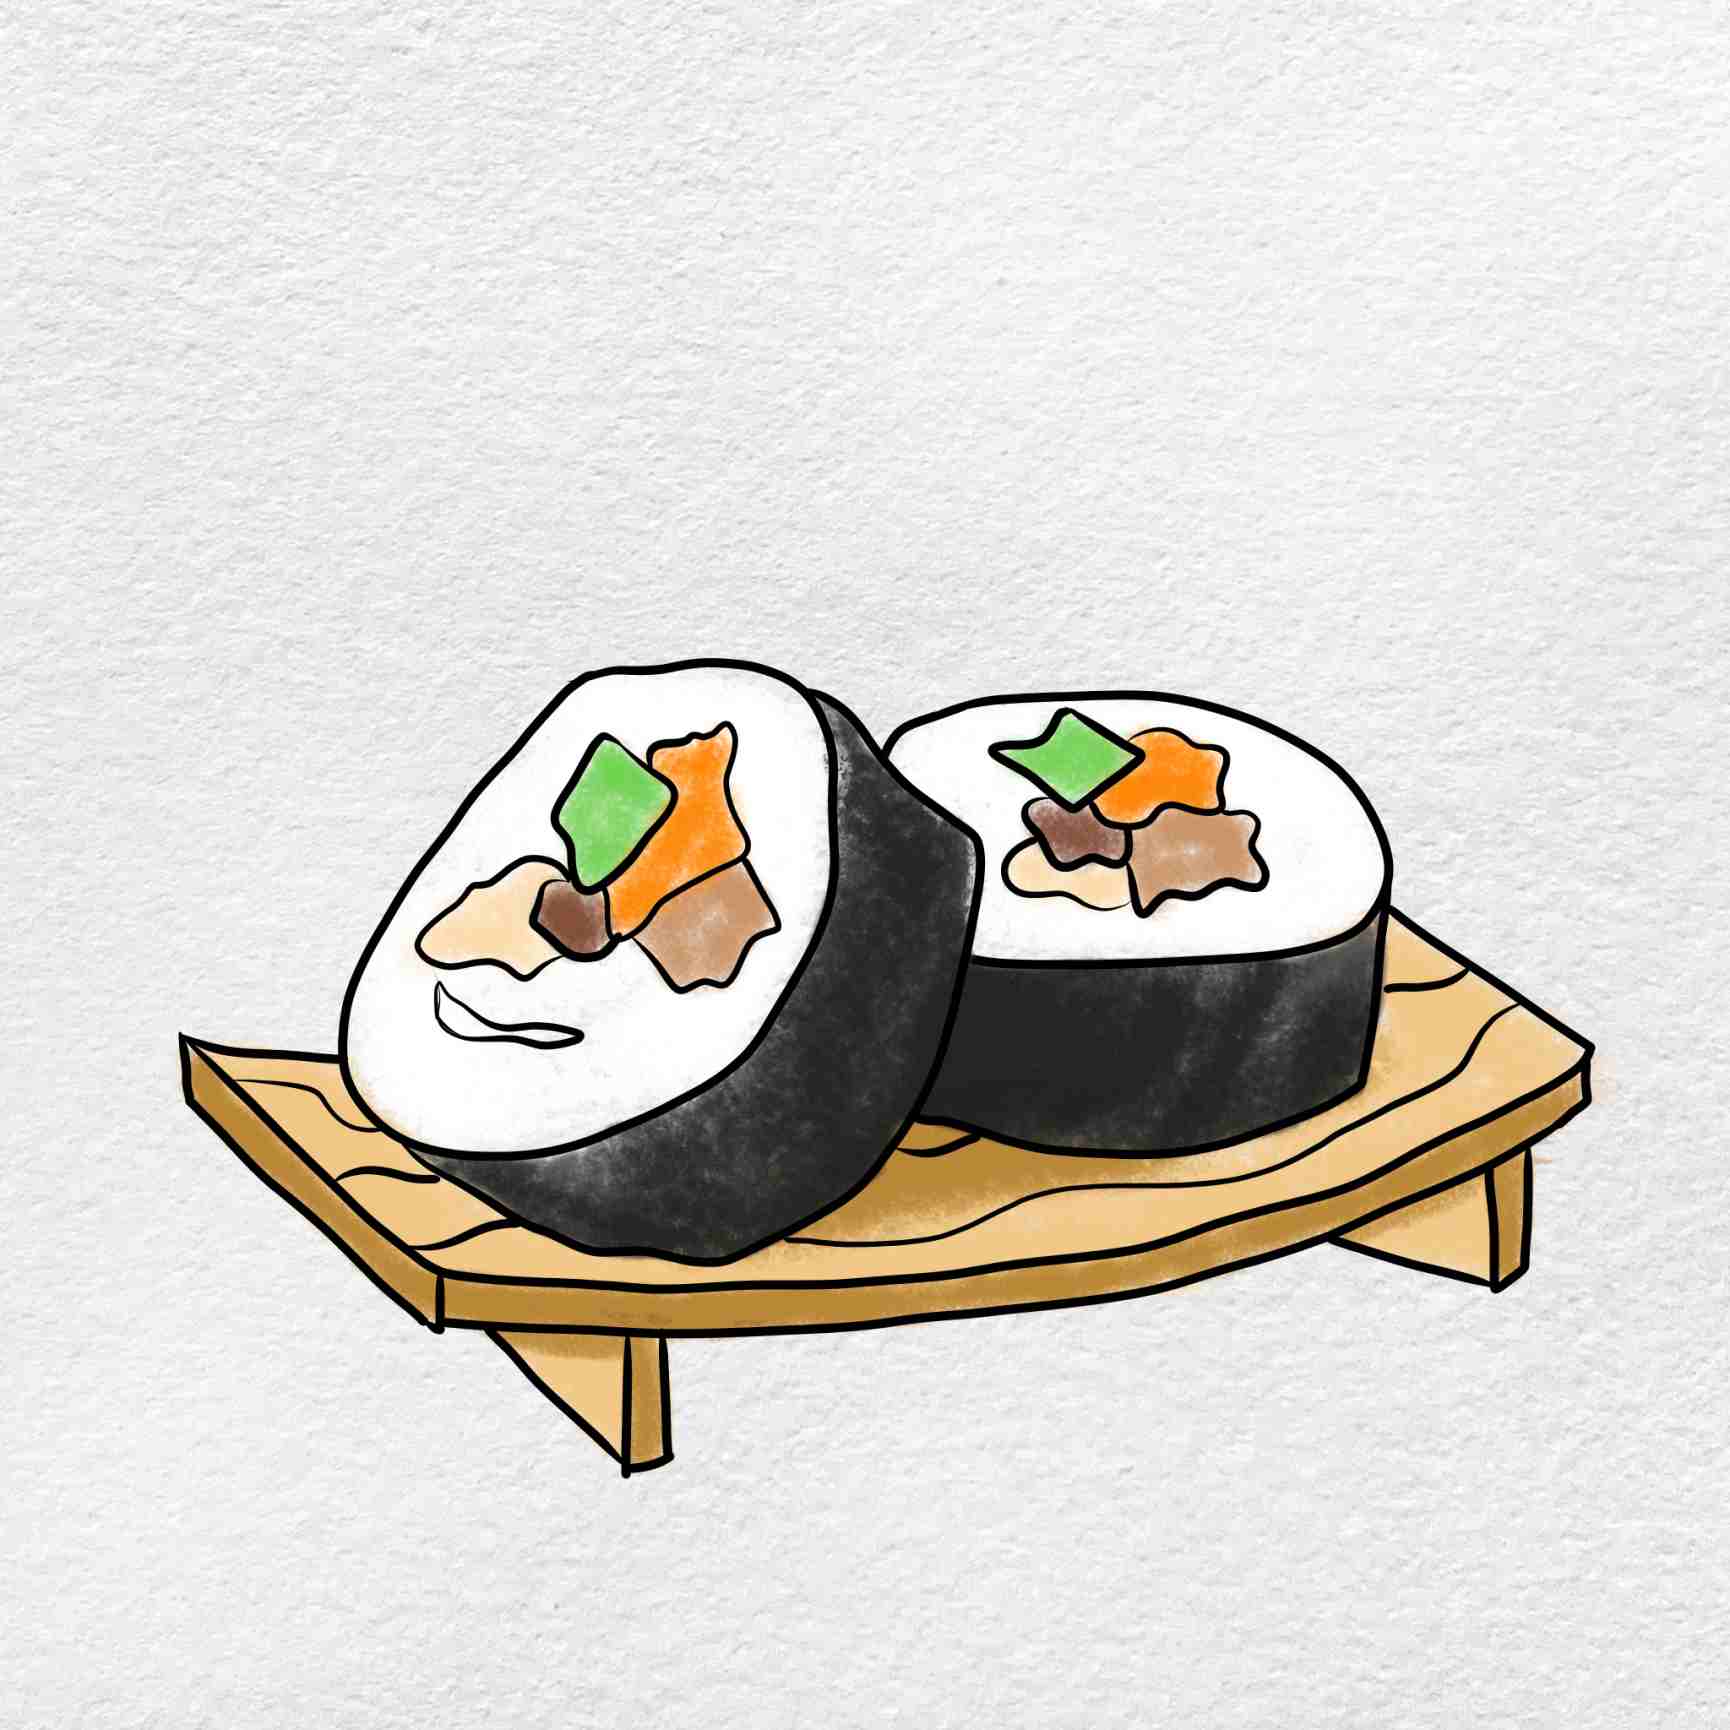 How to draw sushi